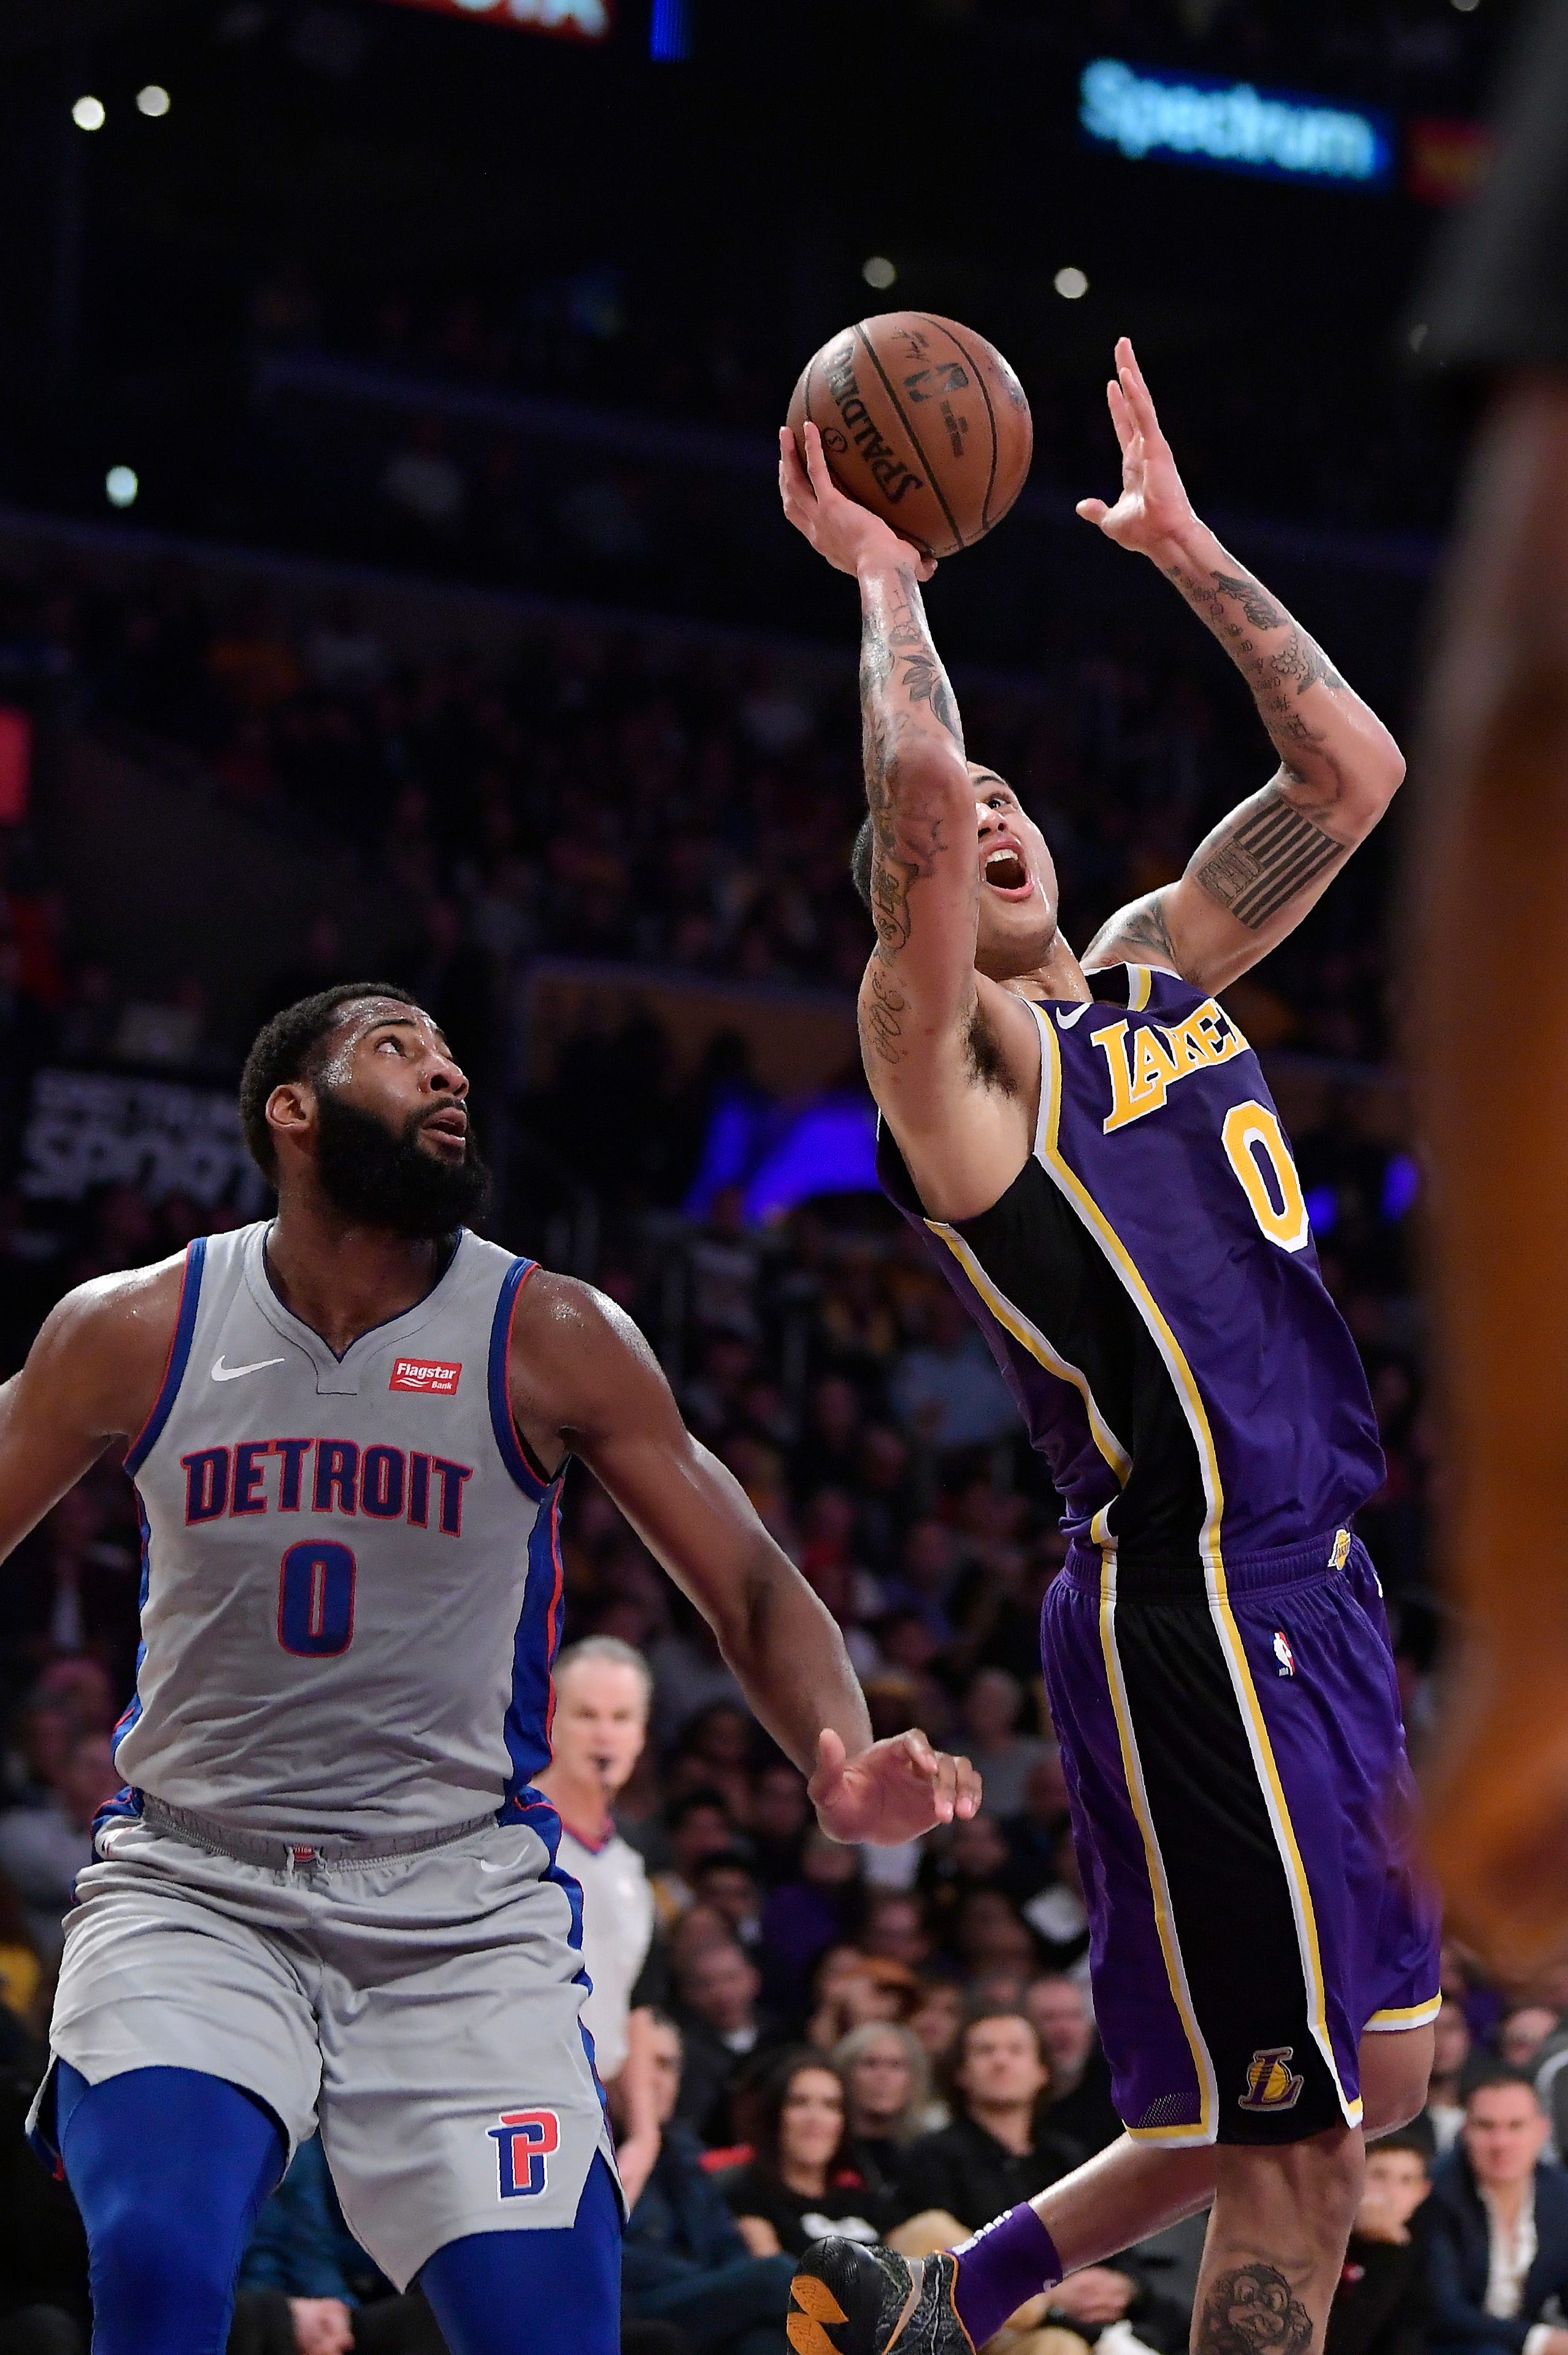 Los Angeles Lakers forward Kyle Kuzma, right, shoots as Detroit Pistons center Andre Drummond defends during the second half.